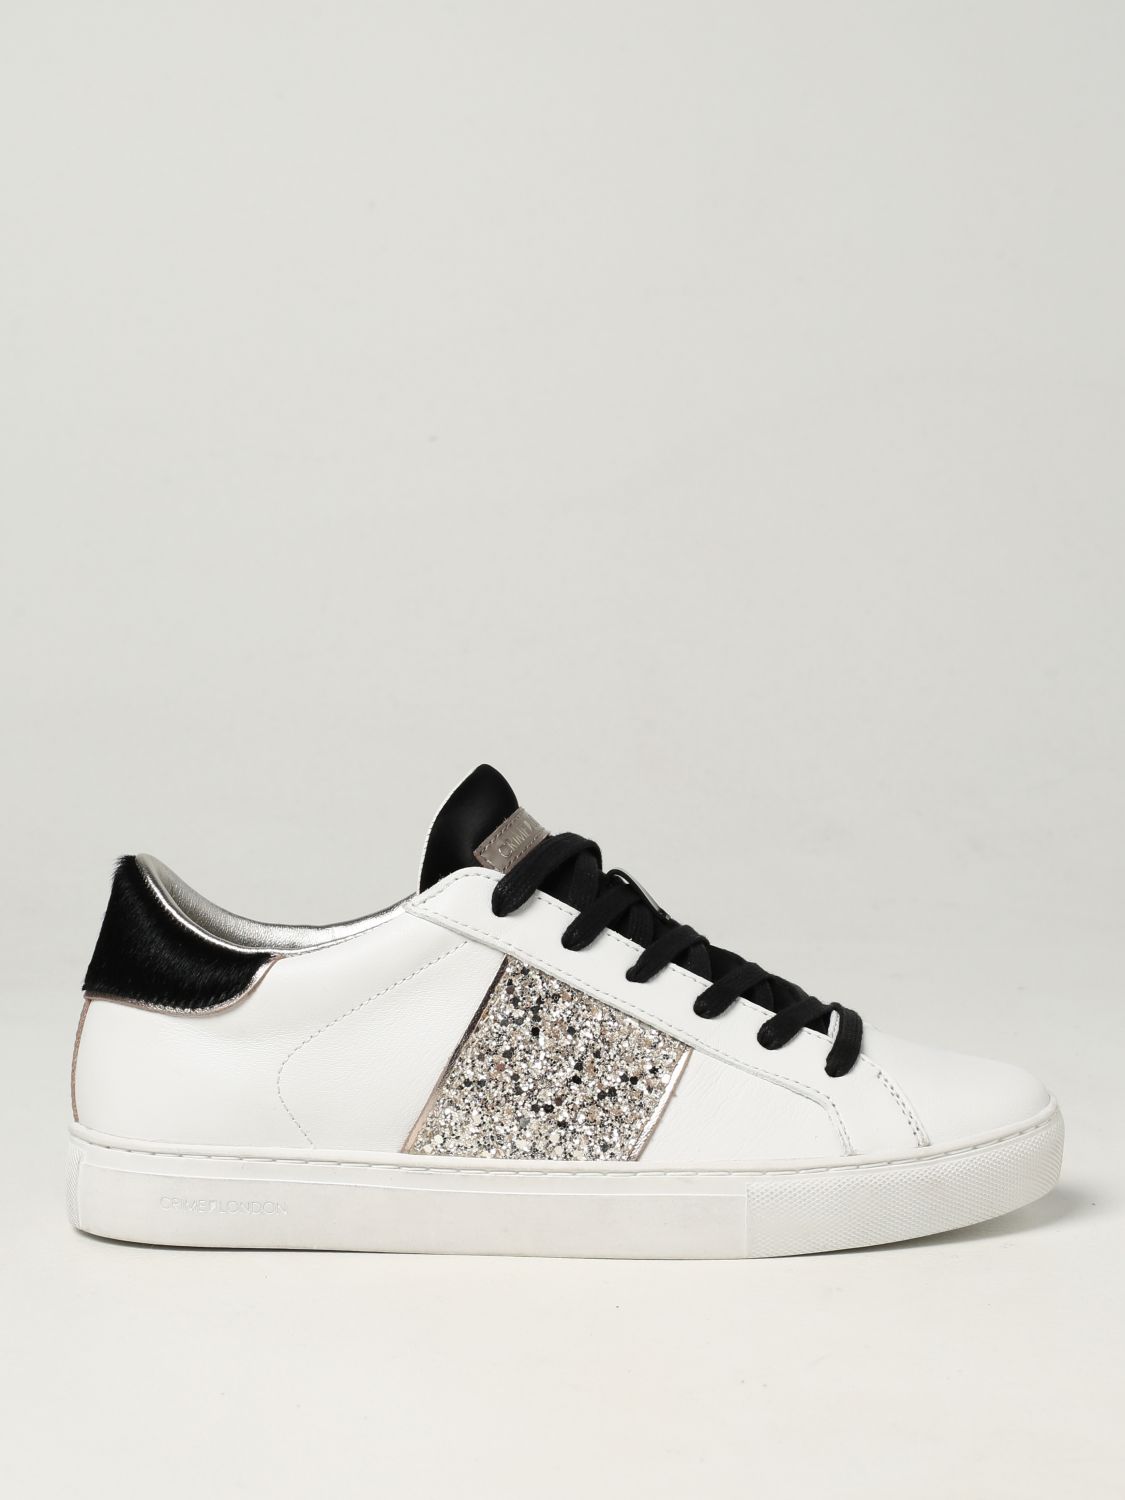 CRIME LONDON: low top sneakers in leather - White | Crime London ...